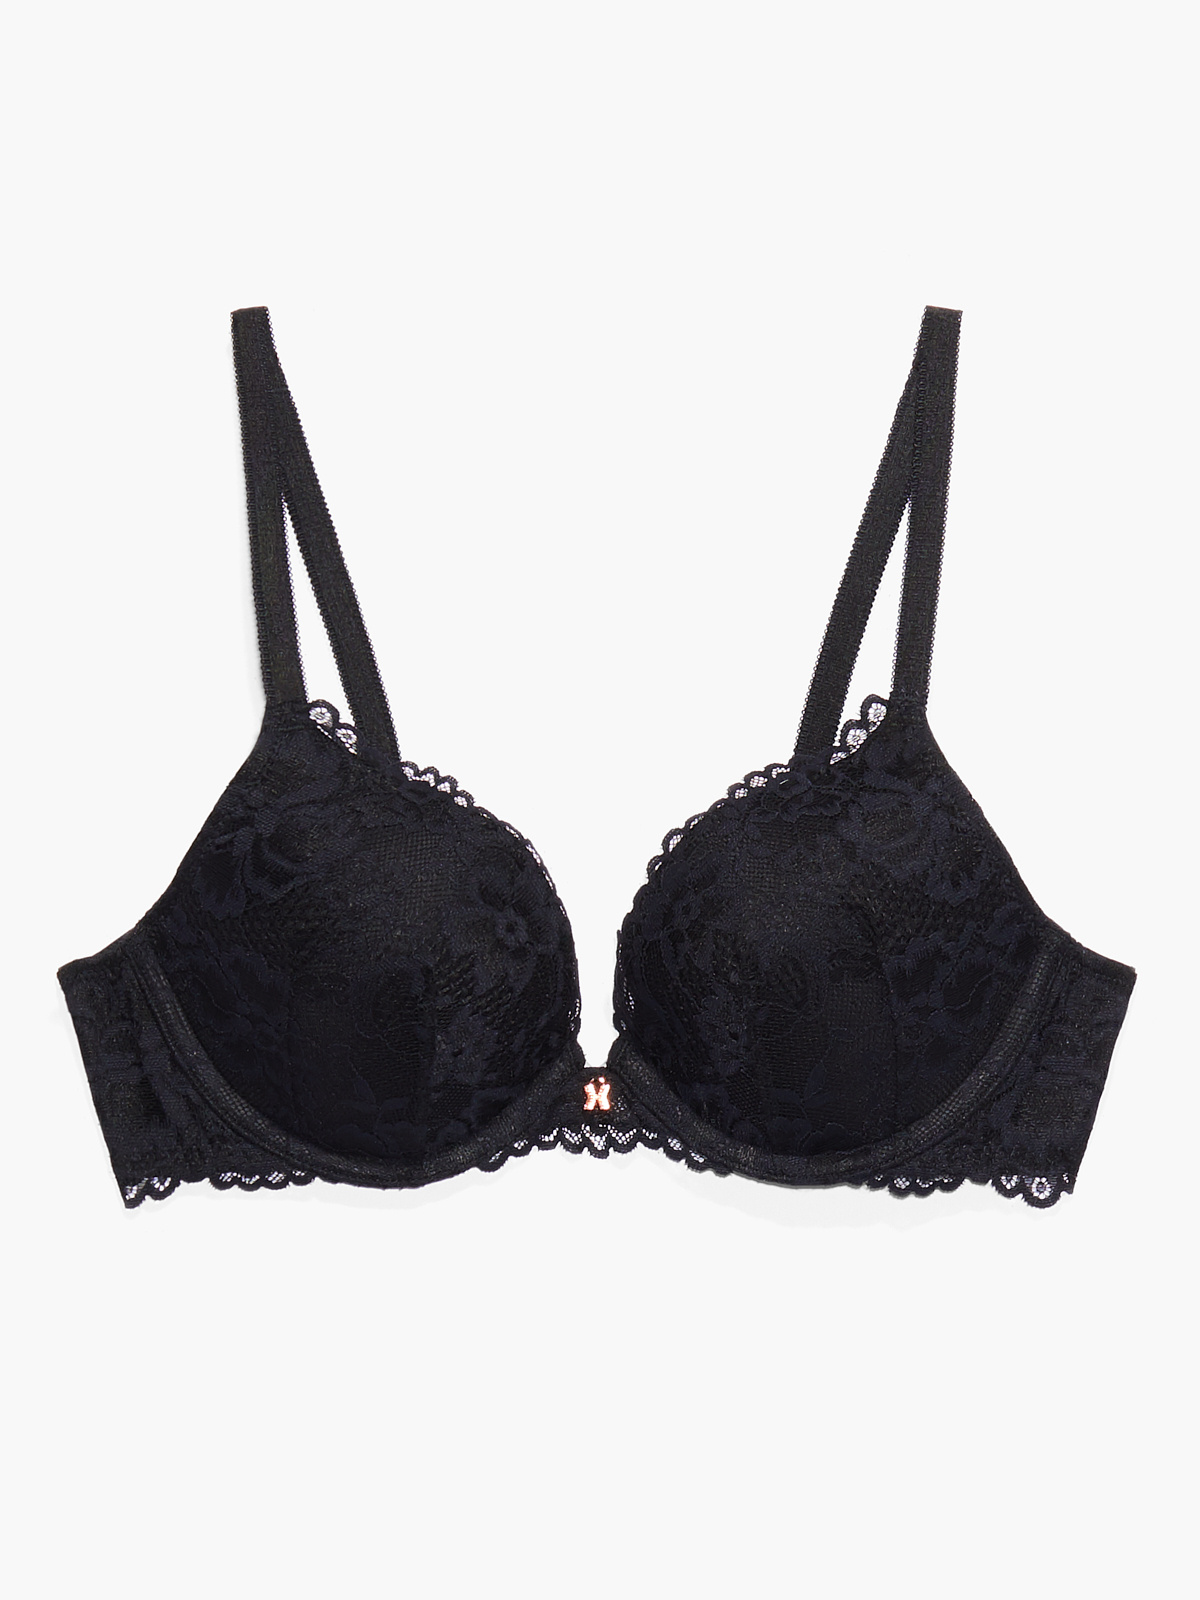 No Boundaries NWT, Allover Floral Lace, Black, Push Up, Bra